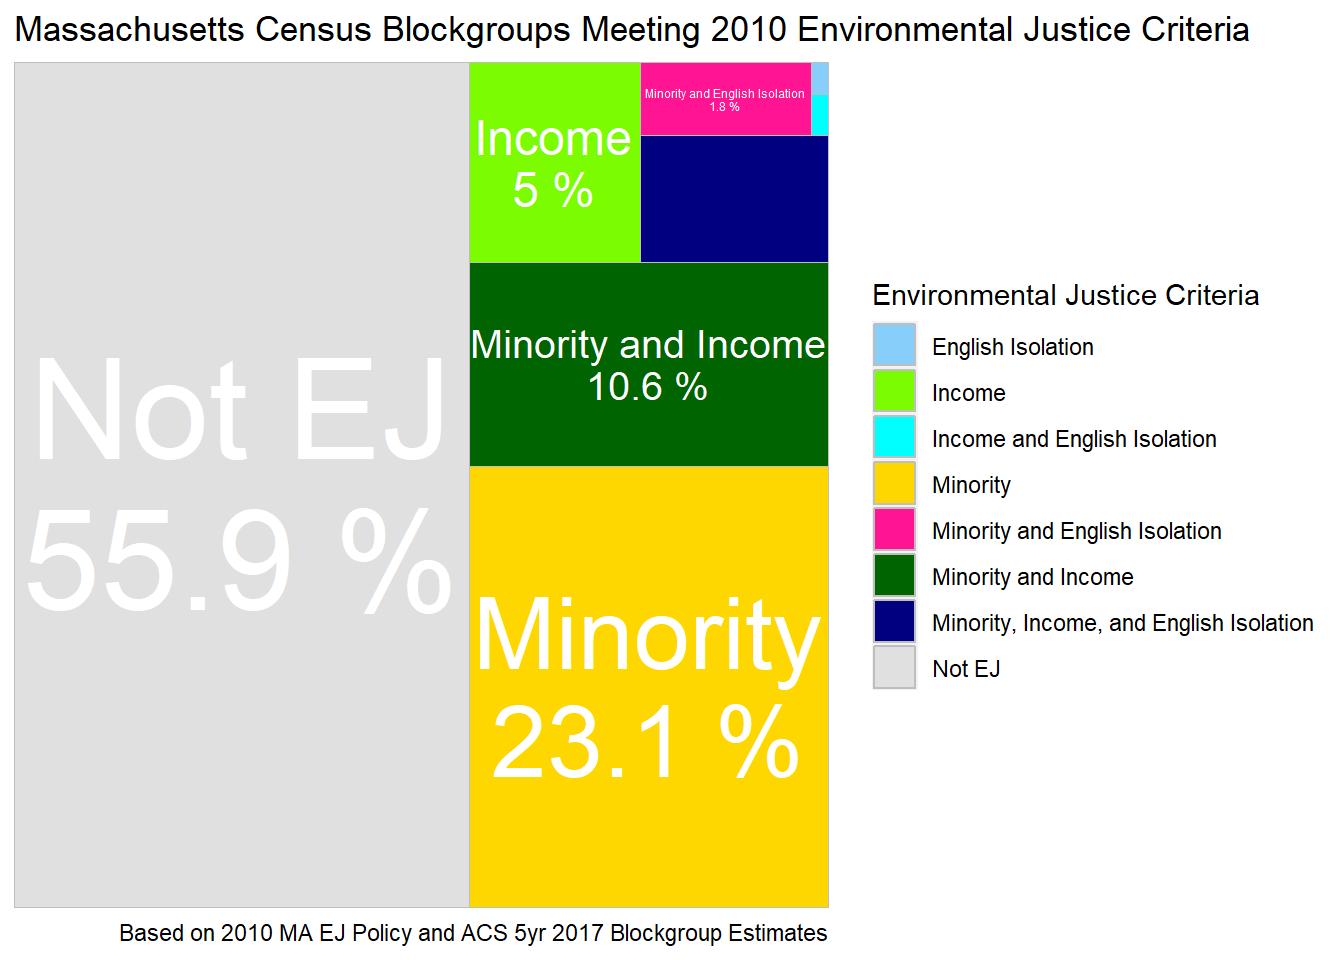 Tree map of block groups classified as environmental justice by 2010-2016 policy.